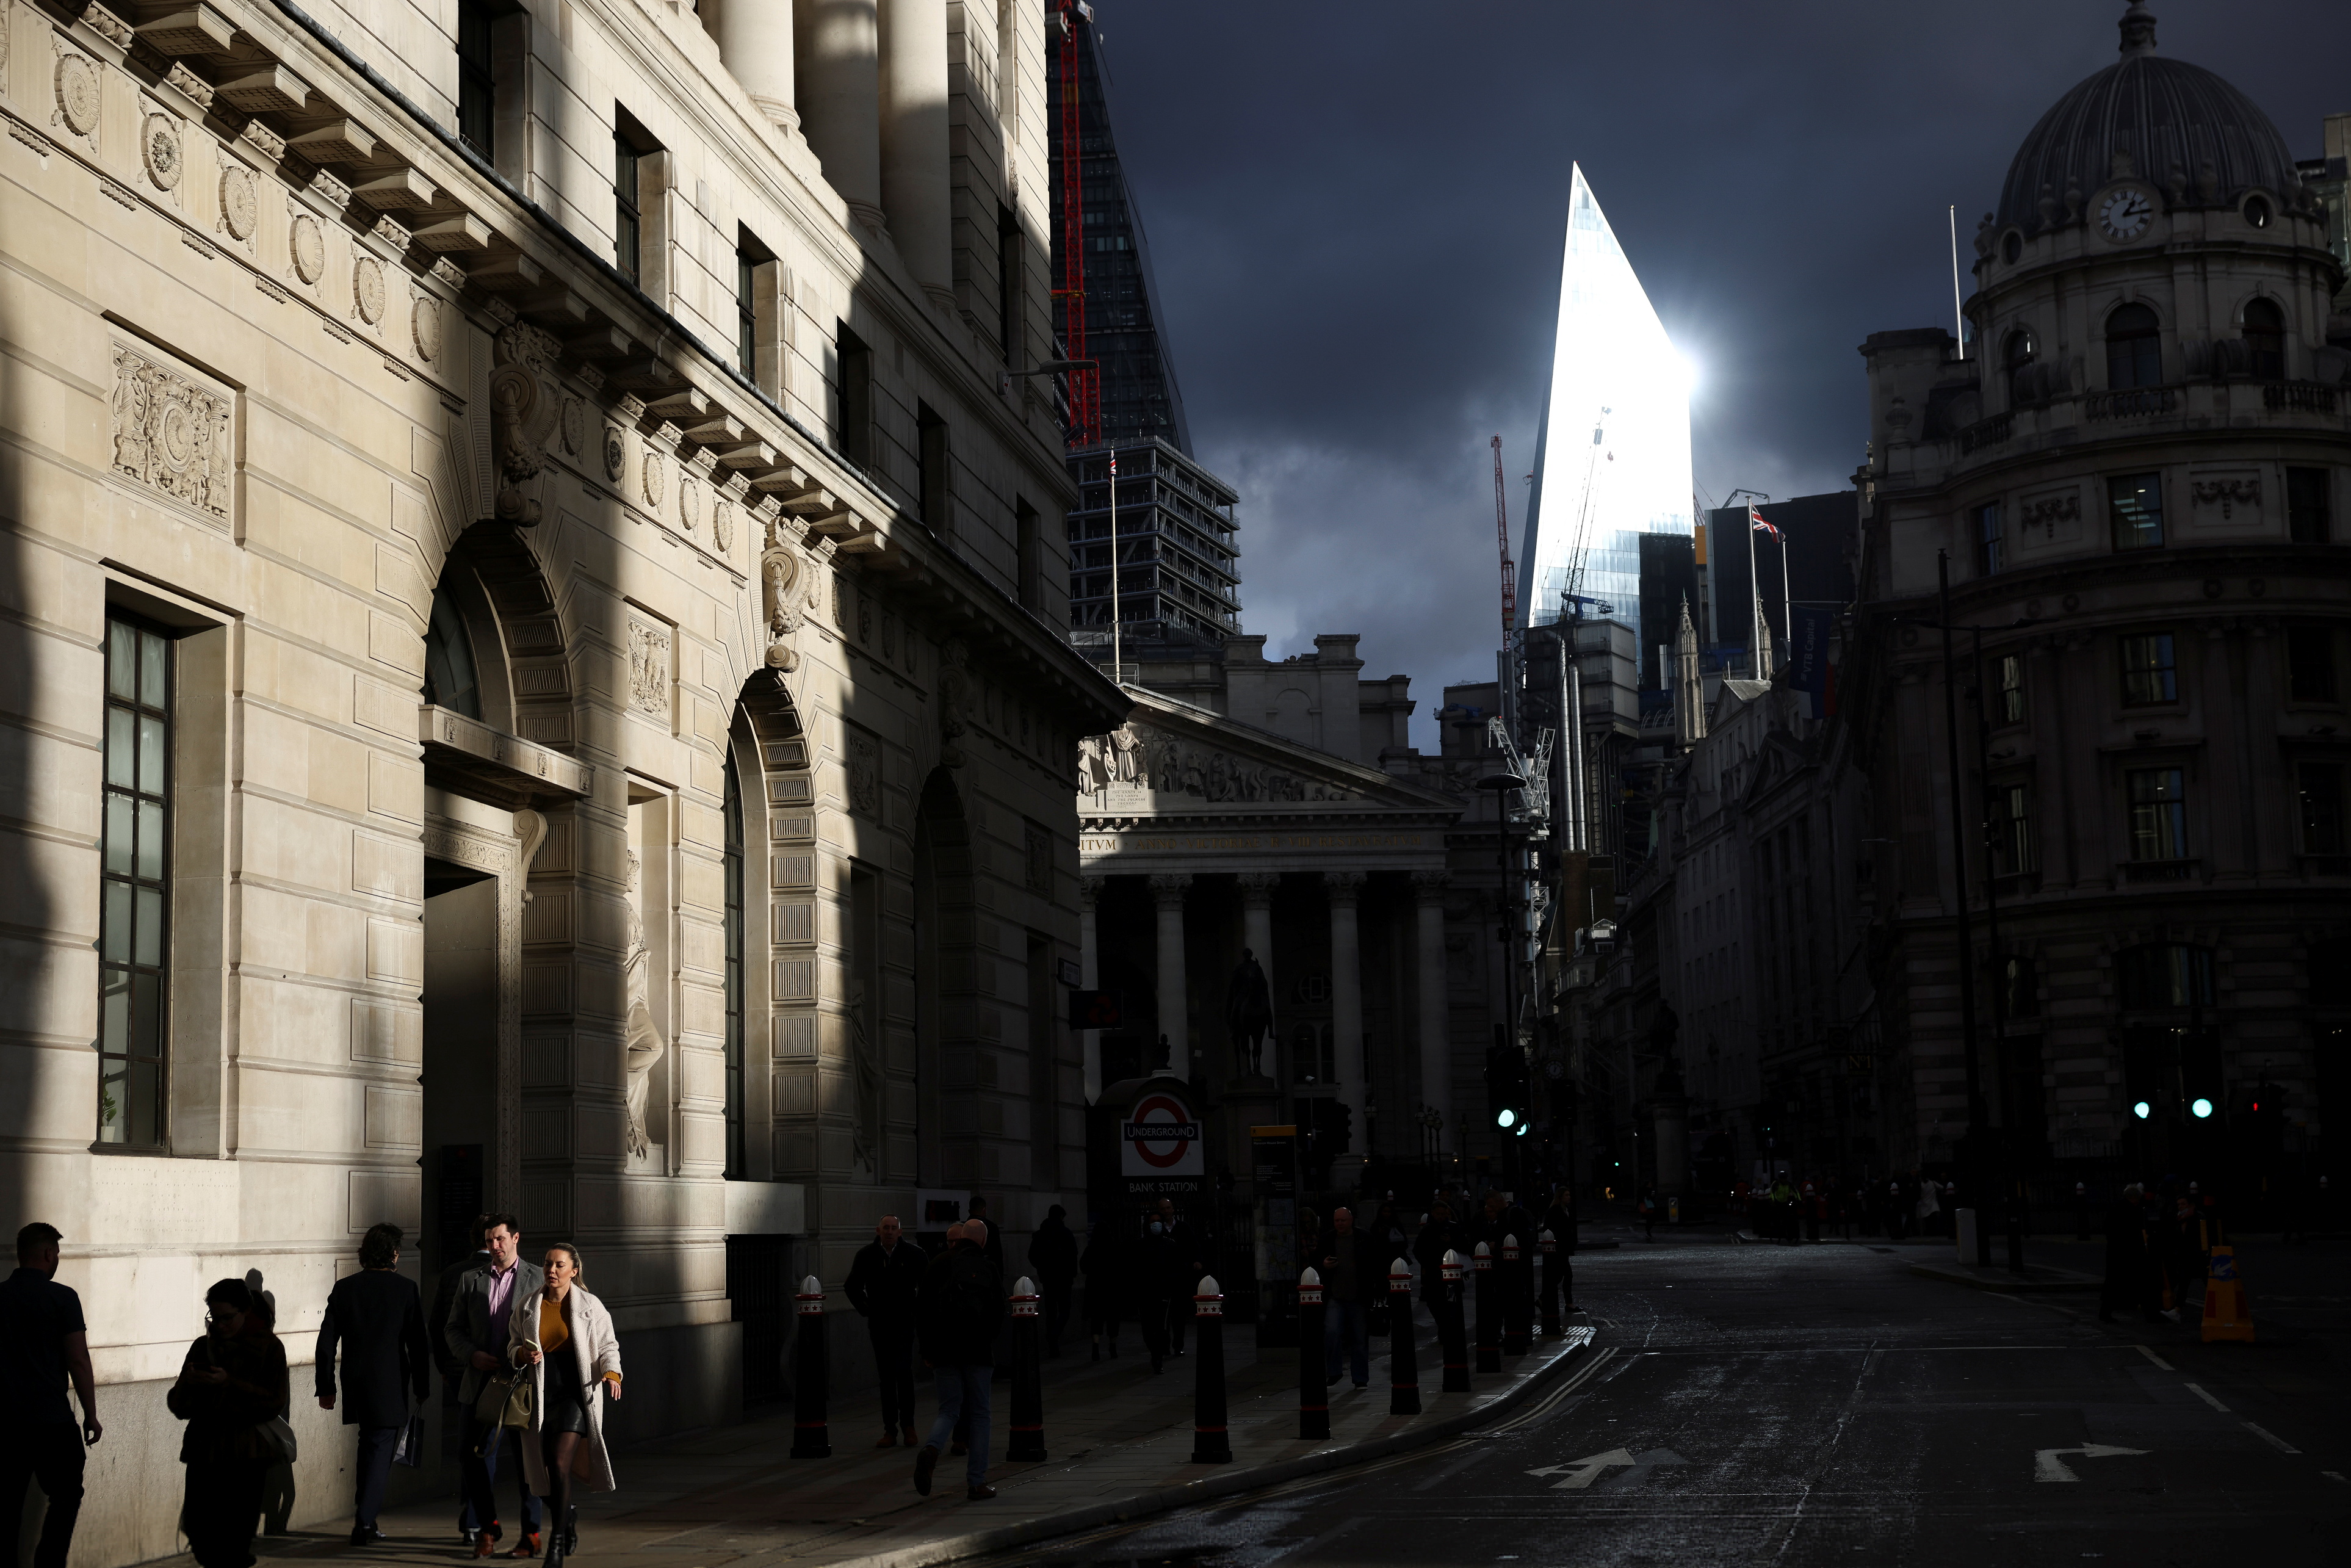 People walk through the City of London financial district, amid the coronavirus disease (COVID-19) outbreak in London